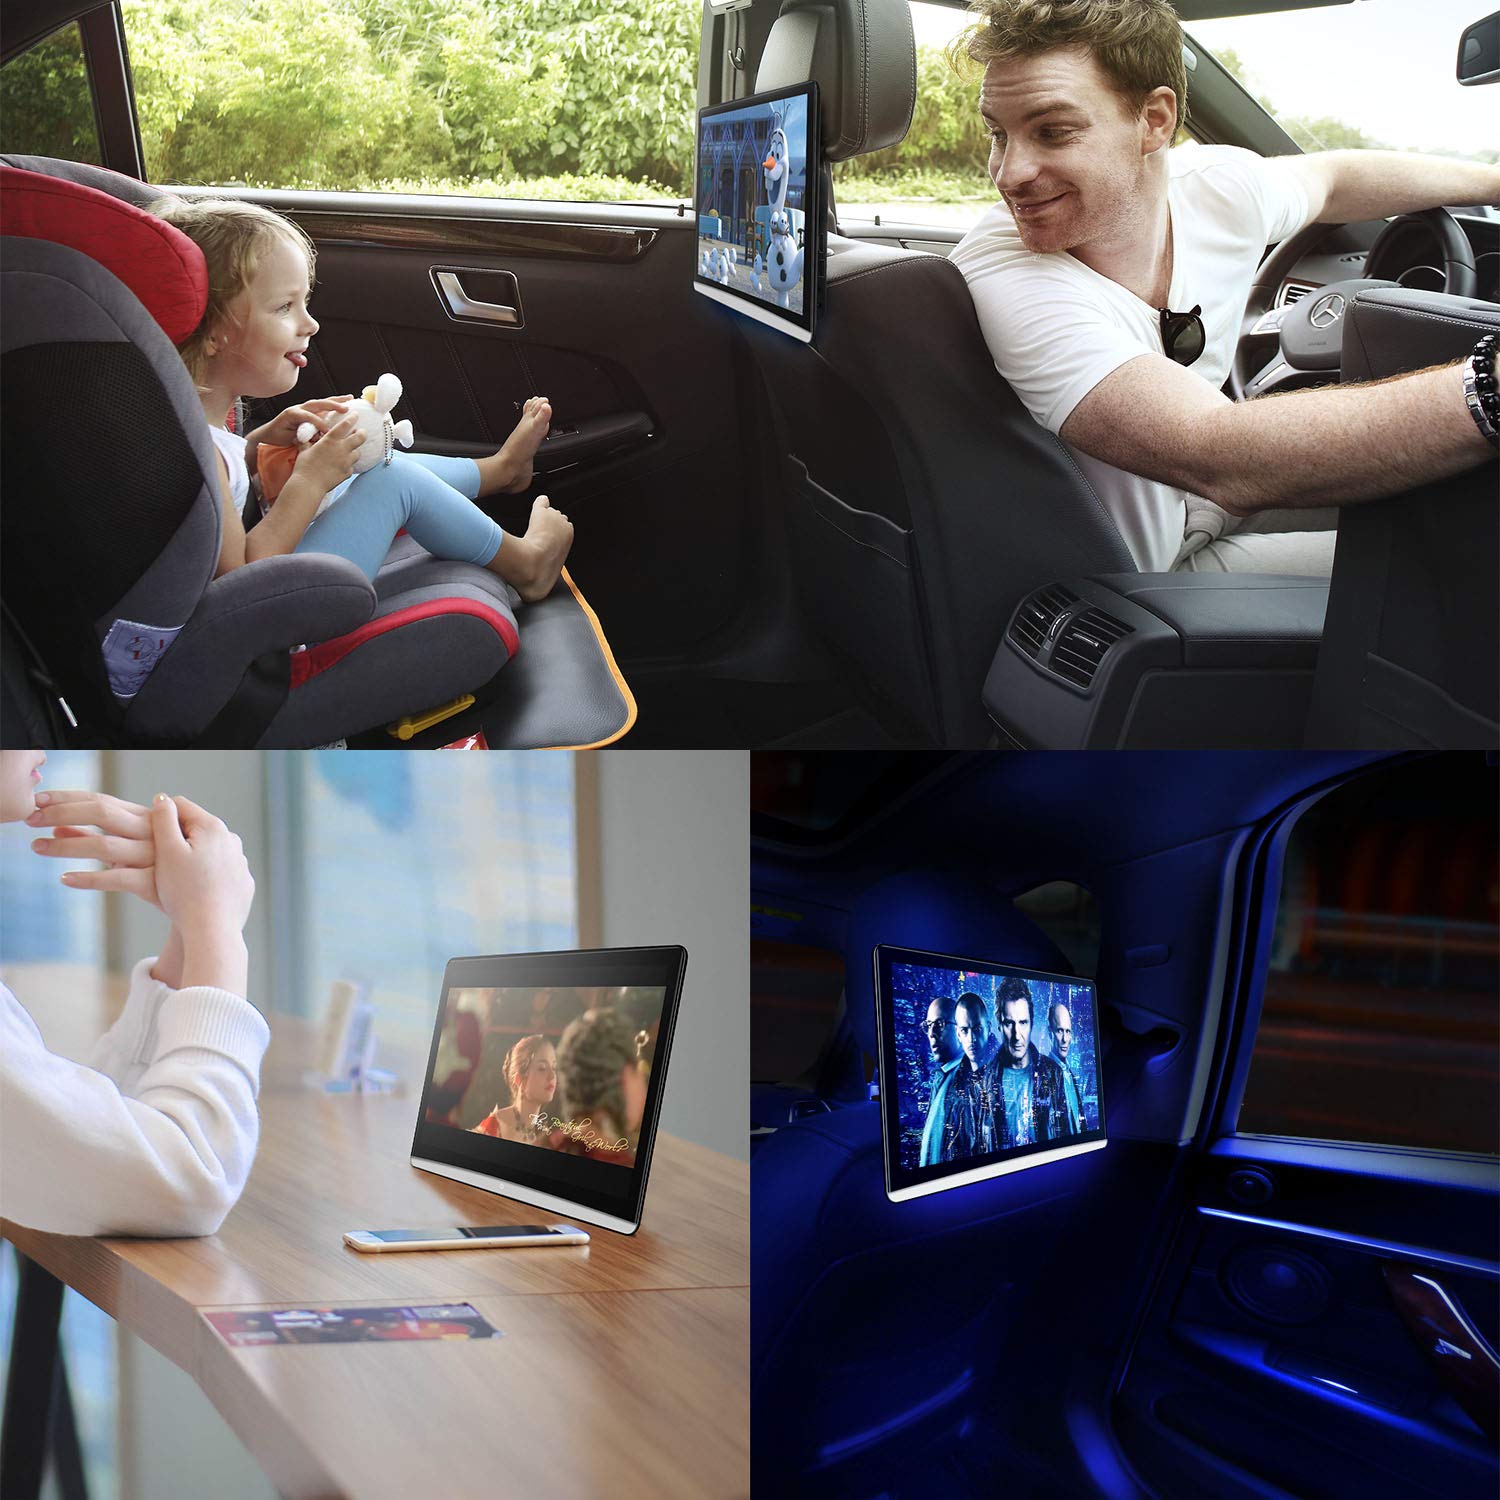 12.4inch Dual Pack Android 10 TV Car Headrest Video Player, 1920X1080 IPS Touch Screen, Support WiFi/Wireless Miracast/Bluetooth/HDMI Input/FM/USB/Micro SD Card